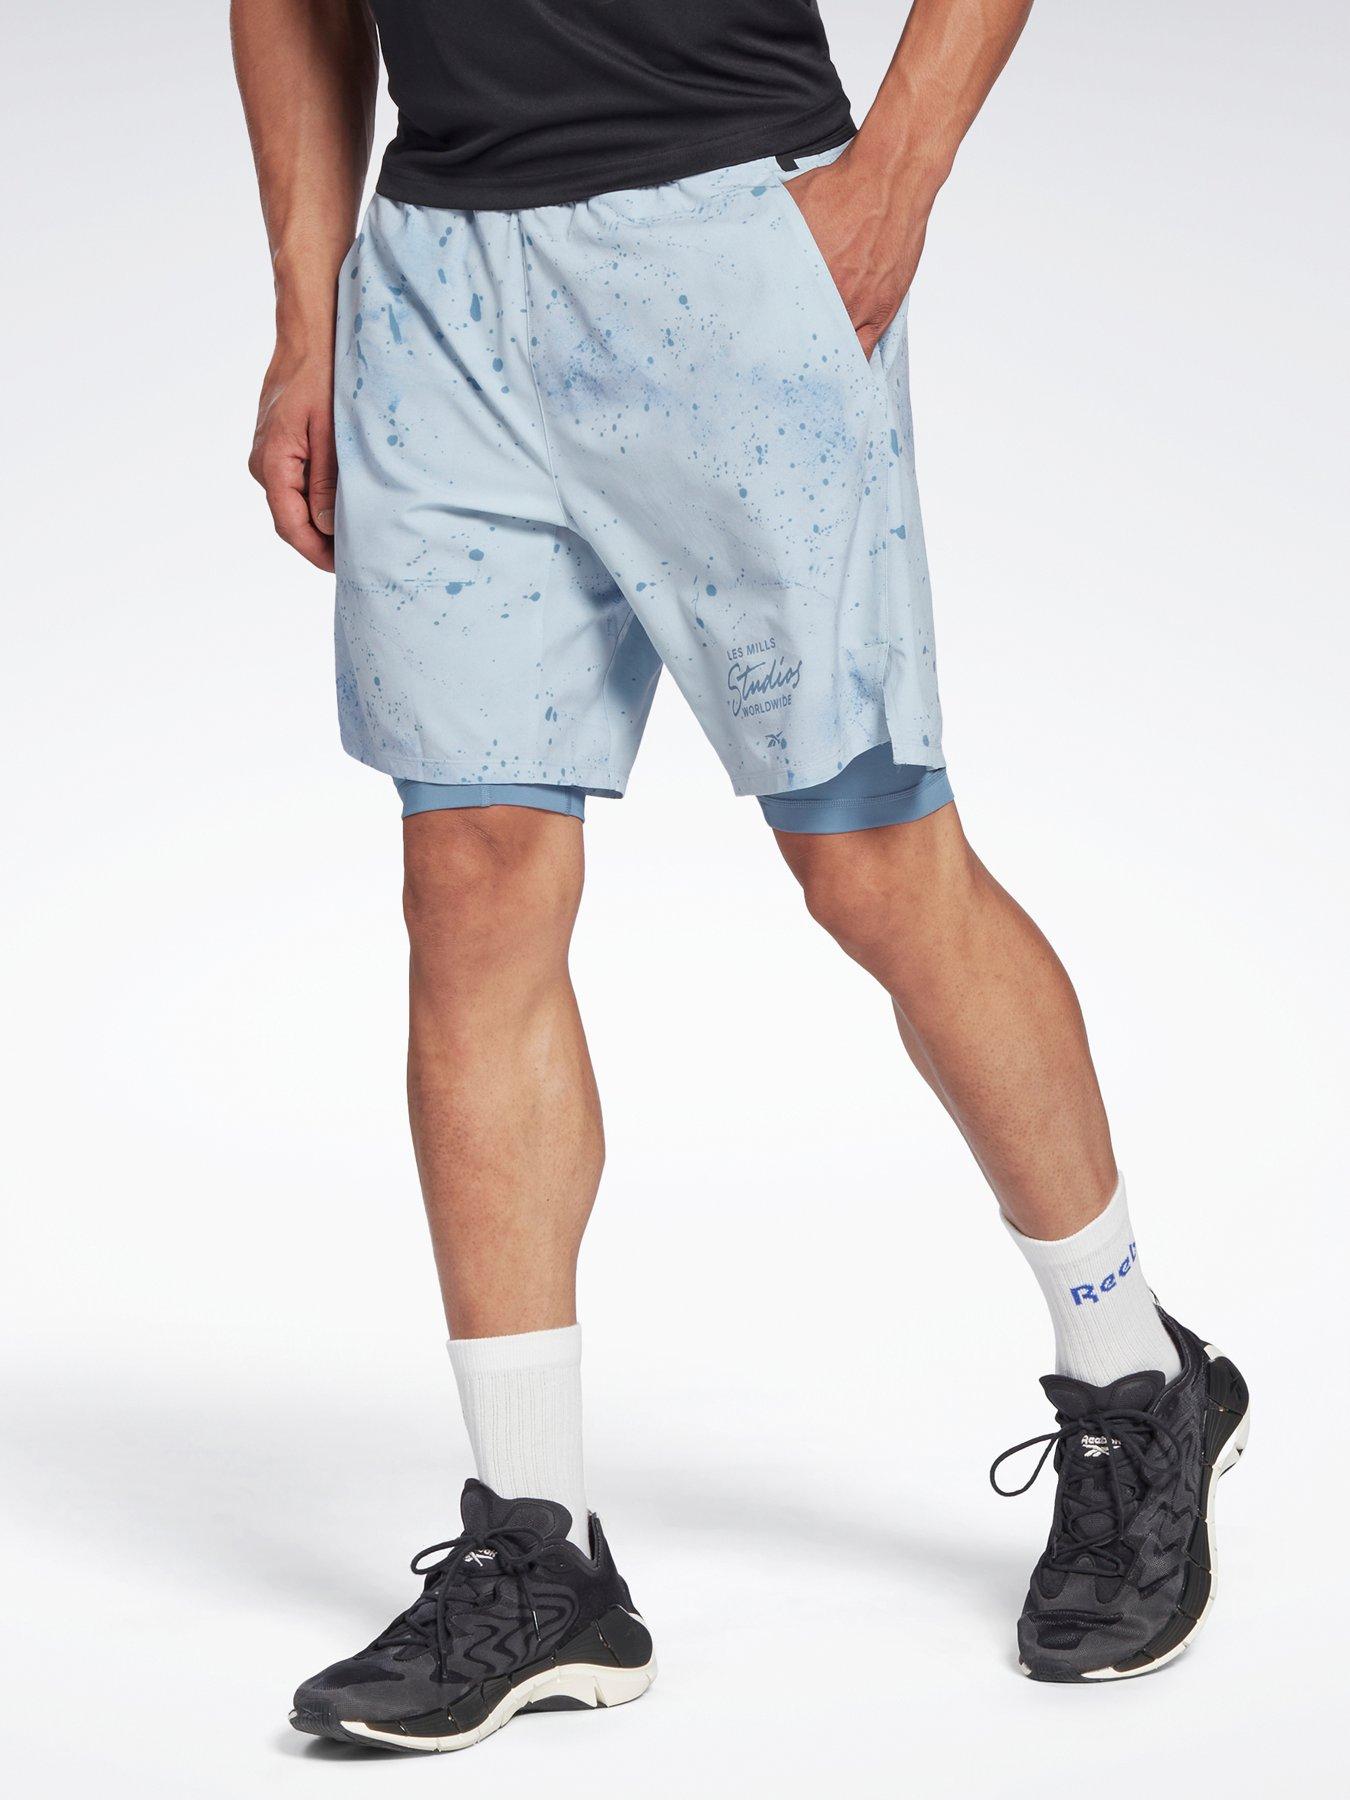 Men Les Mills Strength Two-in-One Shorts